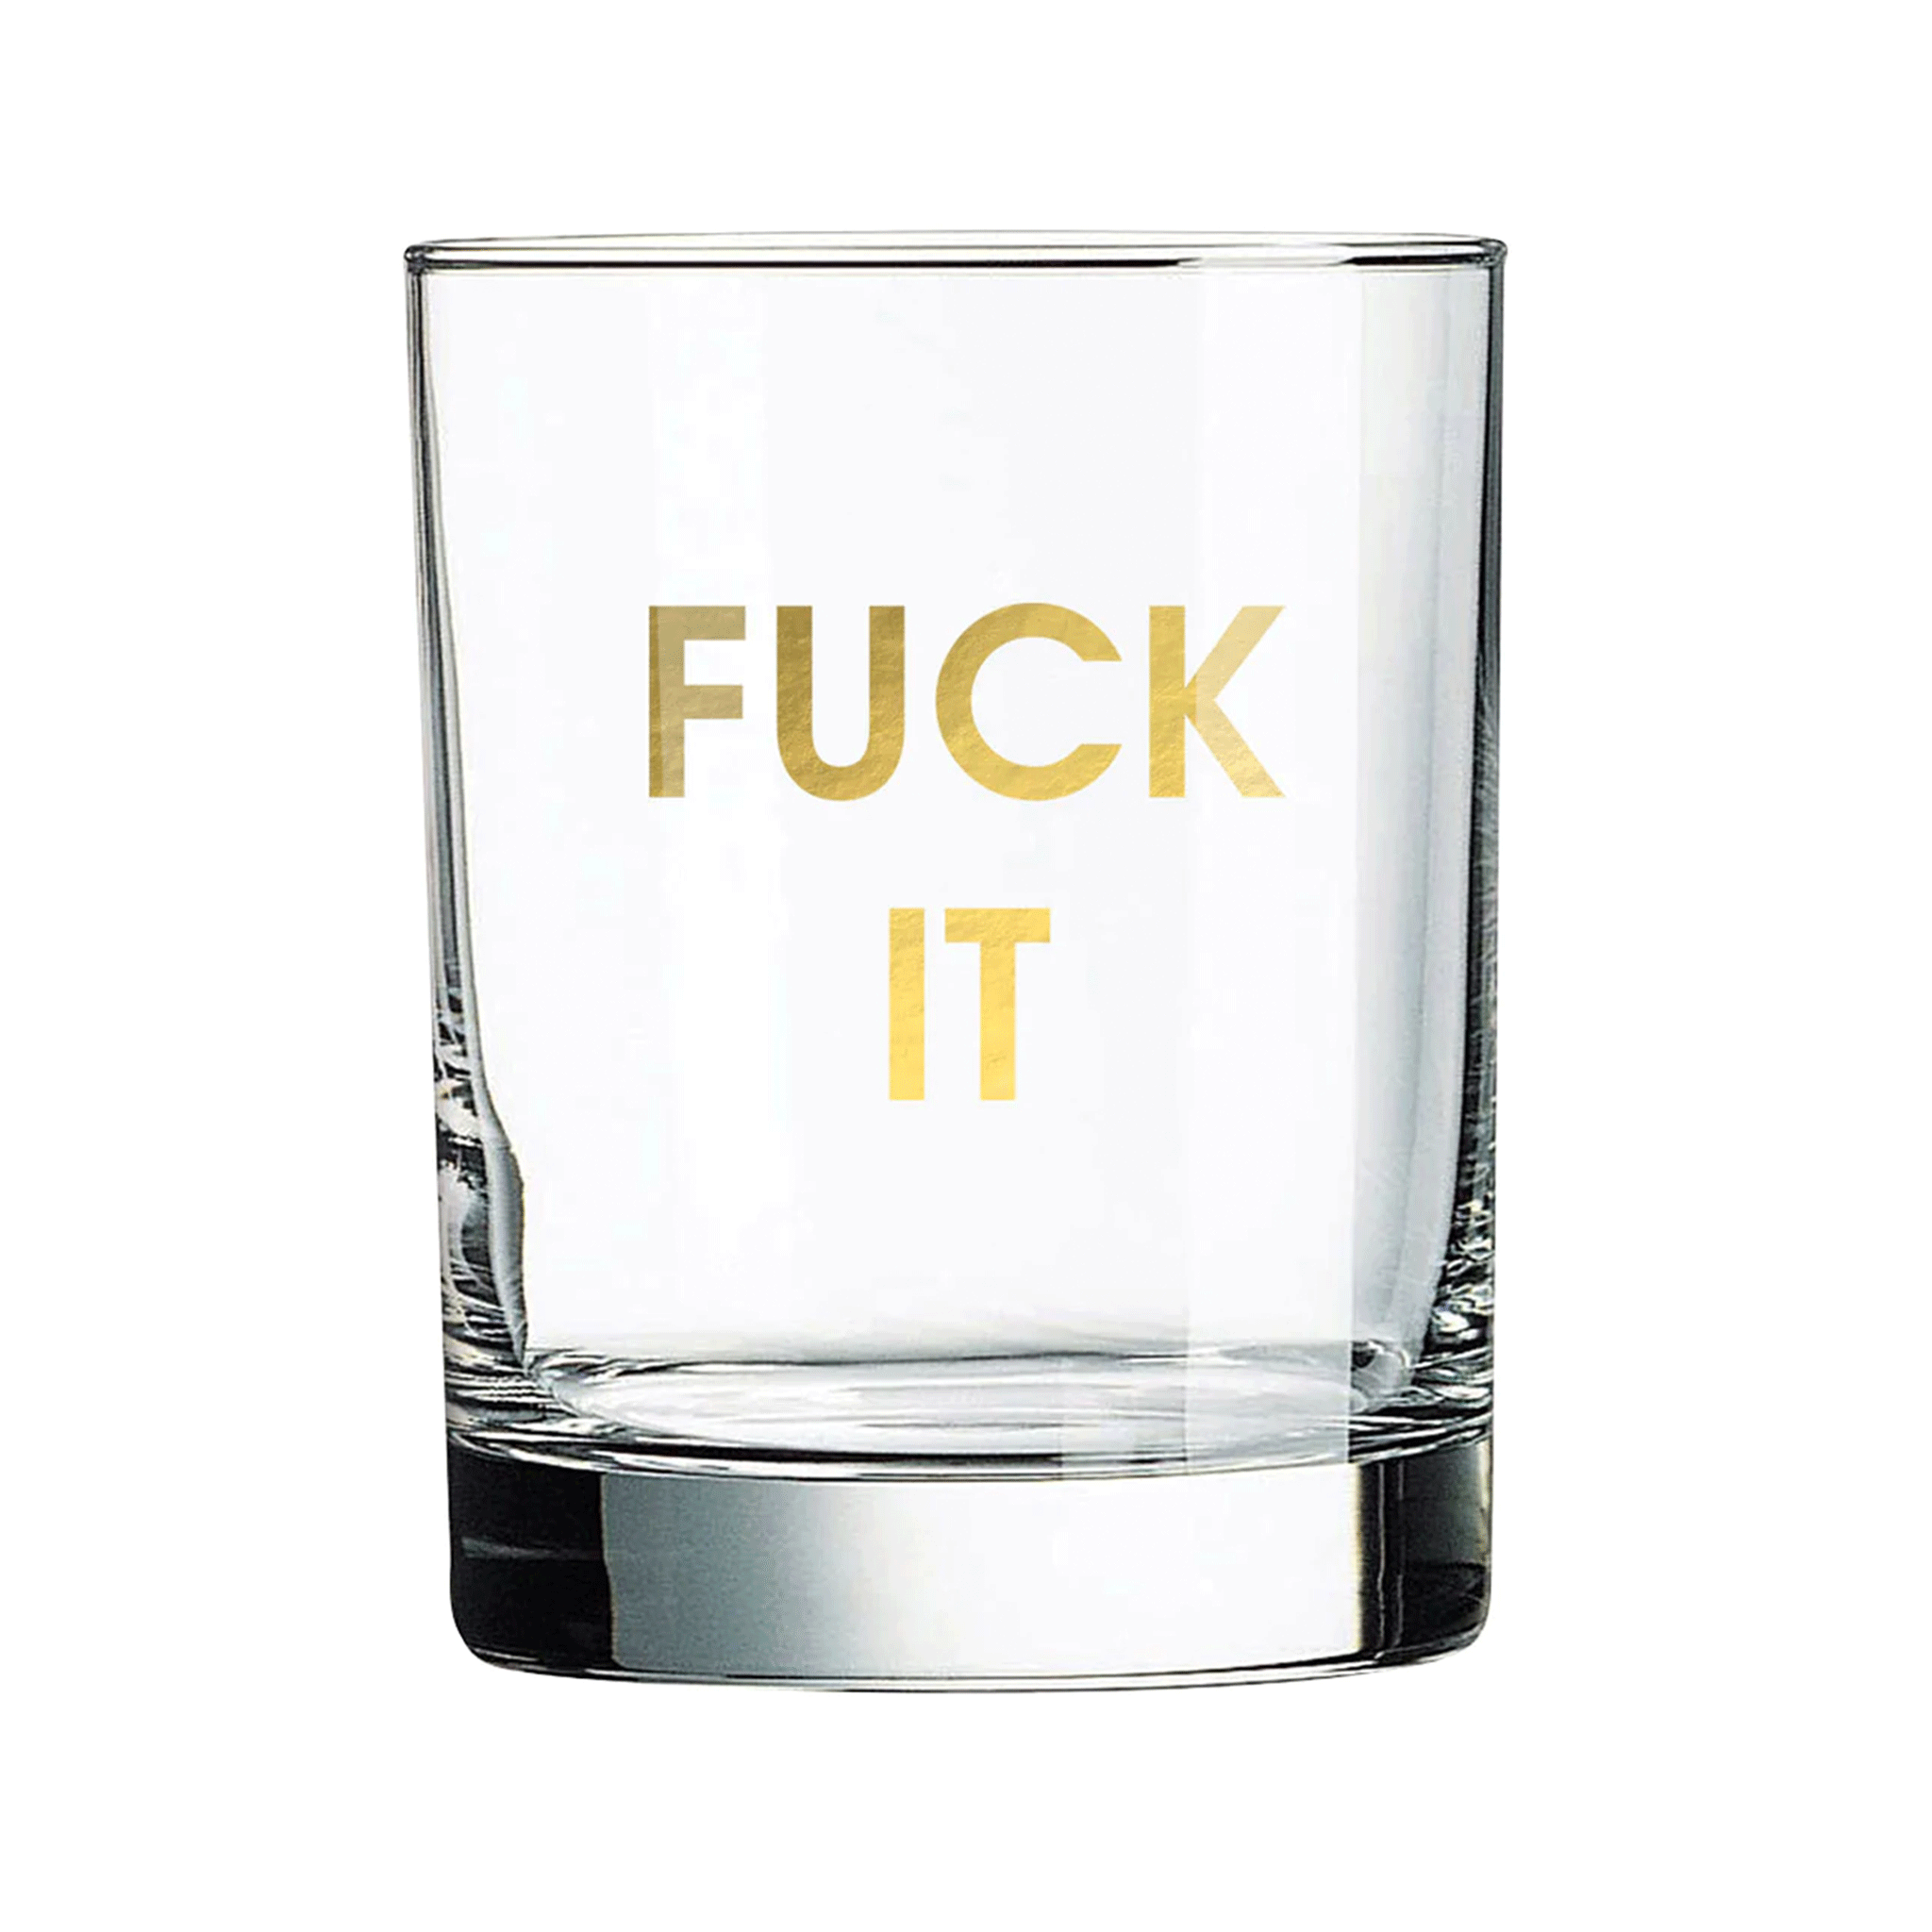 On a white background is a clear glass mug with gold text across the front that reads, "Fuck It".